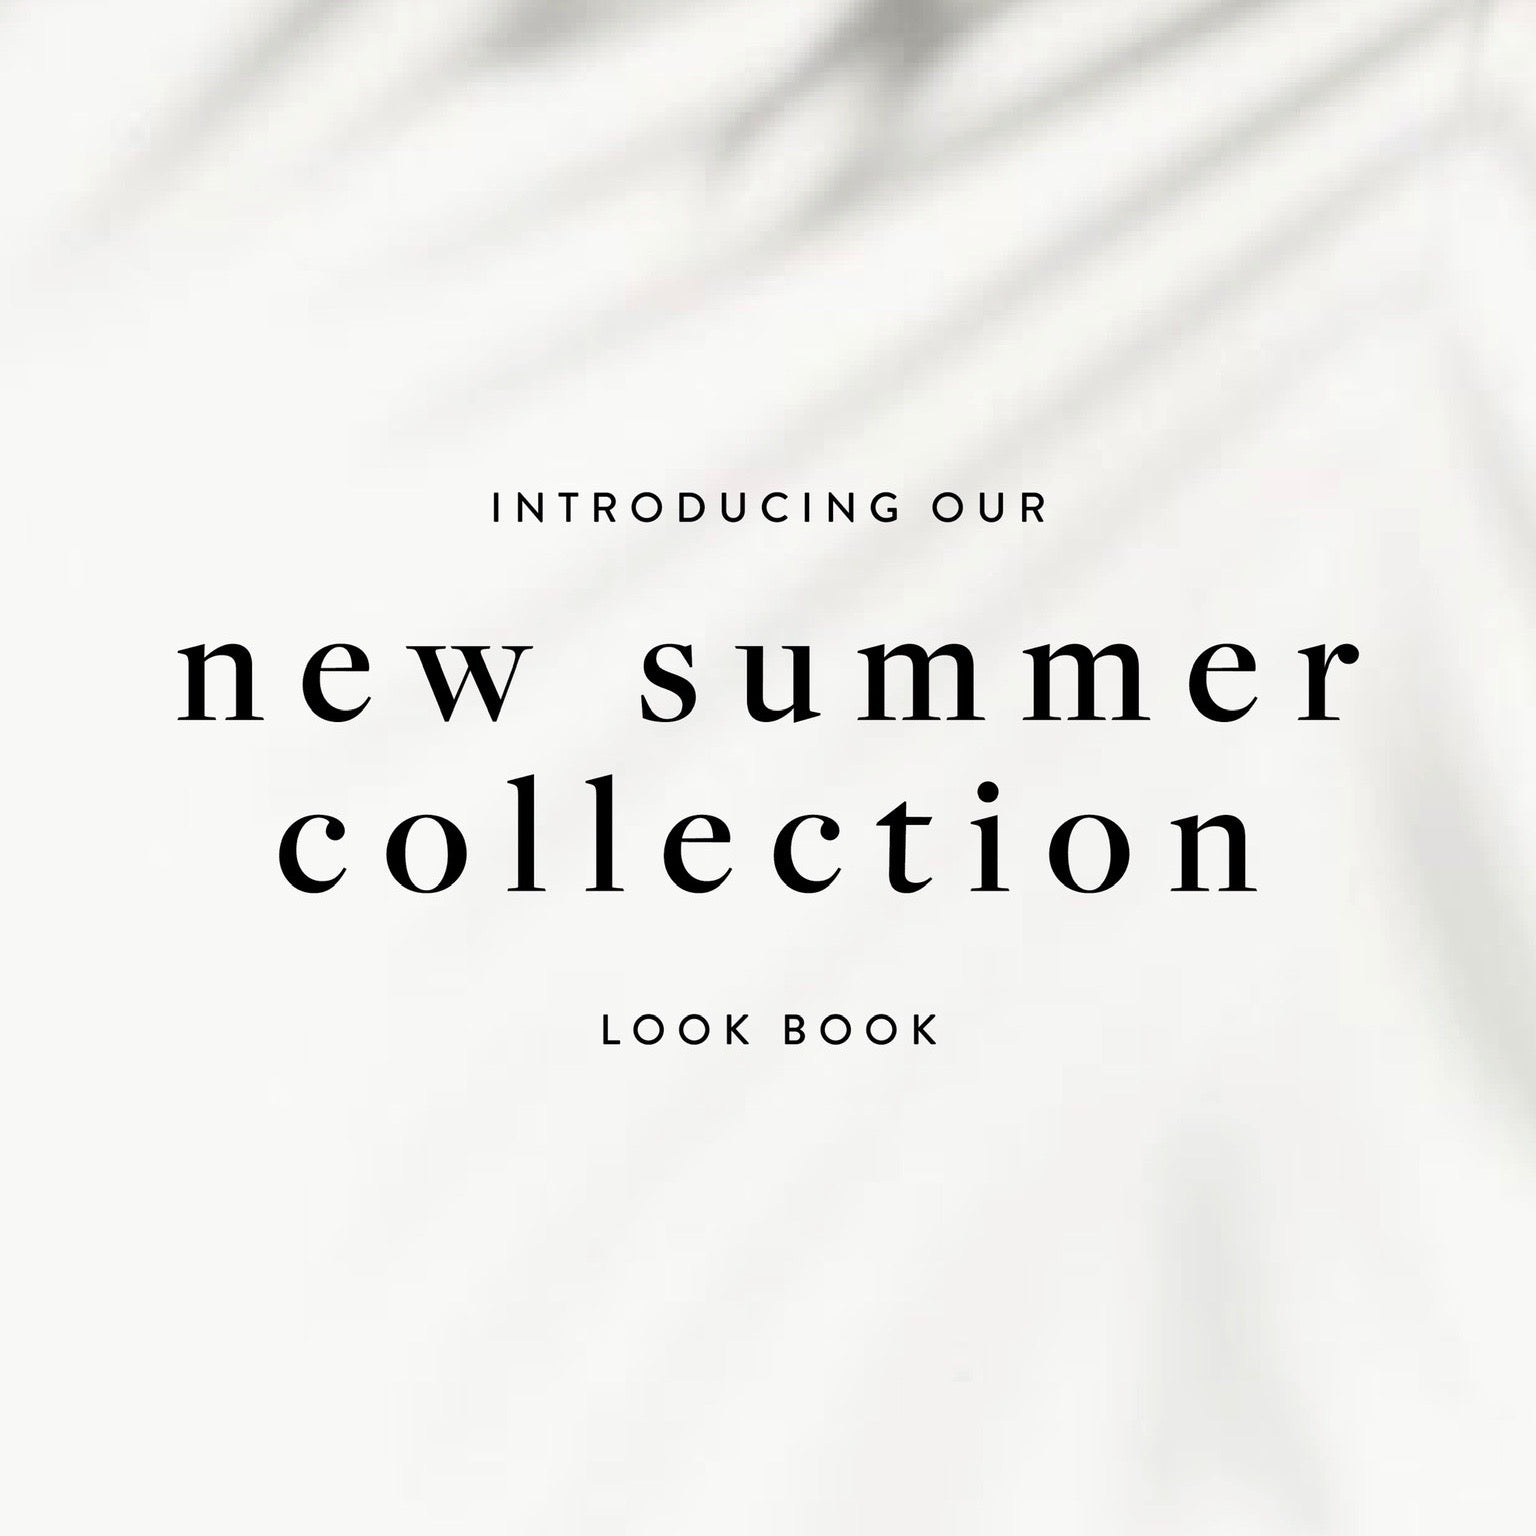 New Summer Collection Look Book